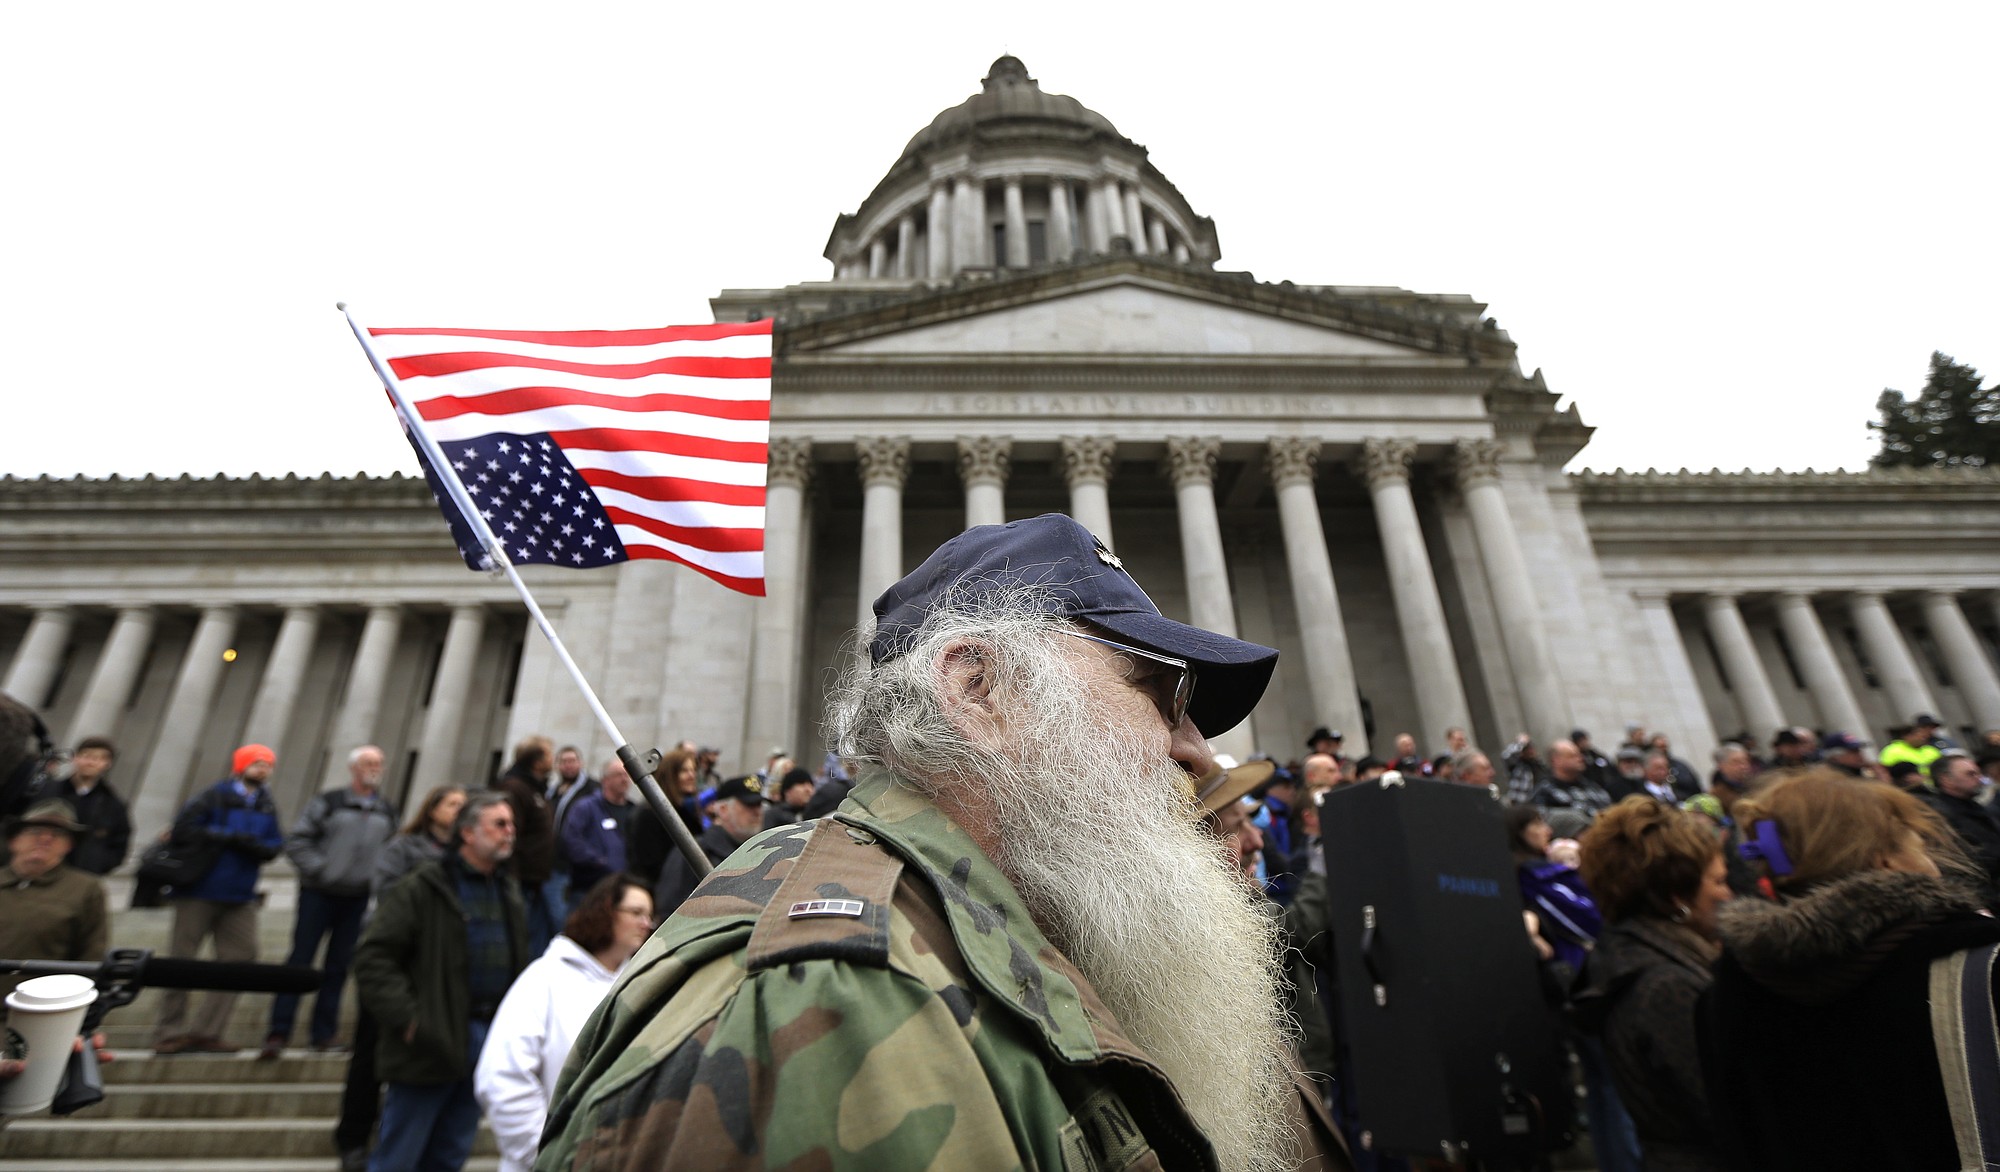 Dave &quot;Doc&quot; Brown, of Tumwater, Wash., displays an upside-down American flag in the barrel of his M1 carbine gun, Thursday, Jan. 15, 2015, during a gun-rights rally at the Capitol in Olympia, Wash. The rally was held to oppose the state's Initiative 594, which requires - with only a few exceptions - background checks on all gun sales and transfers. (AP Photo/Ted S.